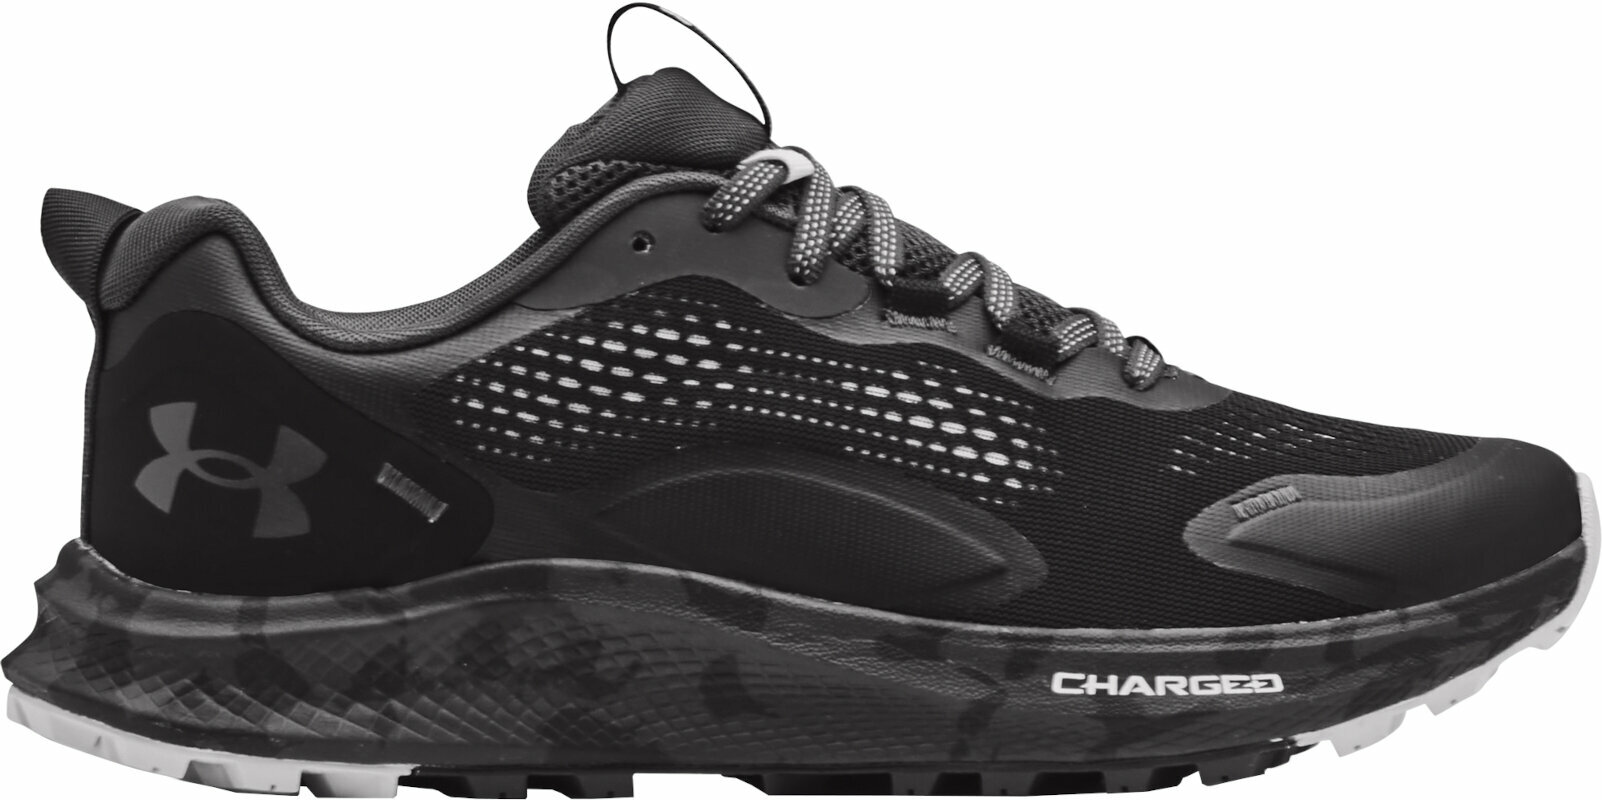 Chaussures de trail running
 Under Armour Women's UA Charged Bandit Trail 2 Running Shoes Black/Jet Gray 36,5 Chaussures de trail running